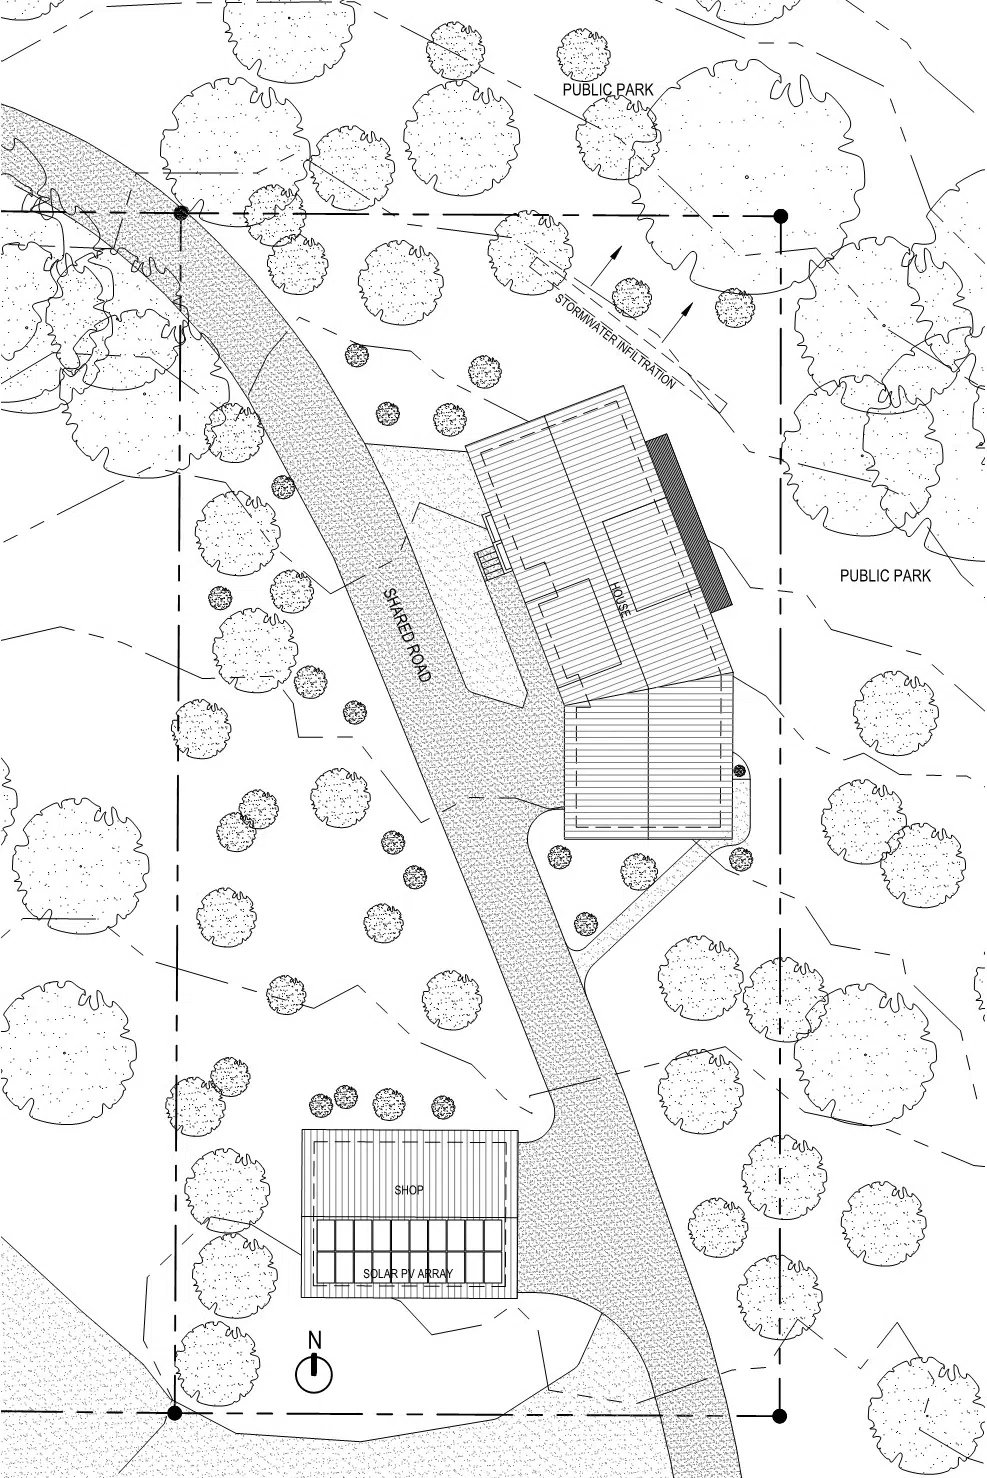 Pond View House site plan - road